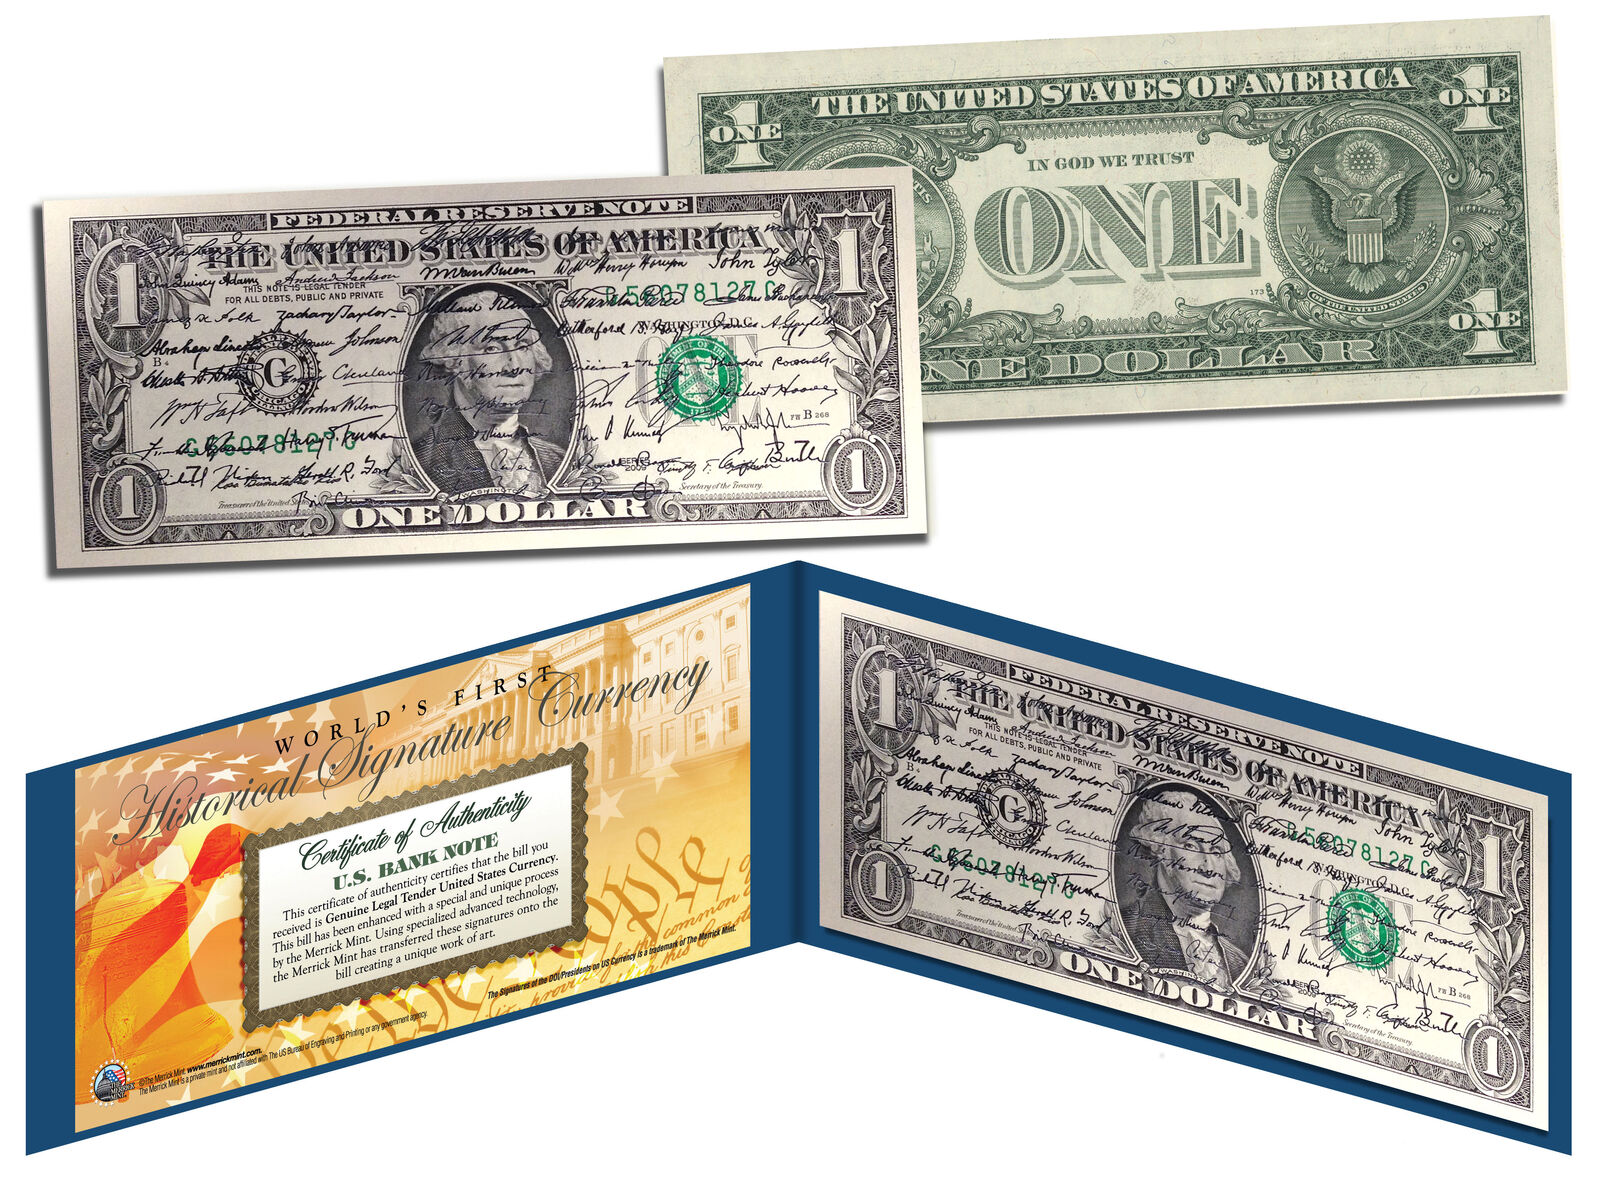 ALL 44 U.S. PRESIDENT SIGNATURES Genuine Legal Tender US $1 Bill *World\'s First*